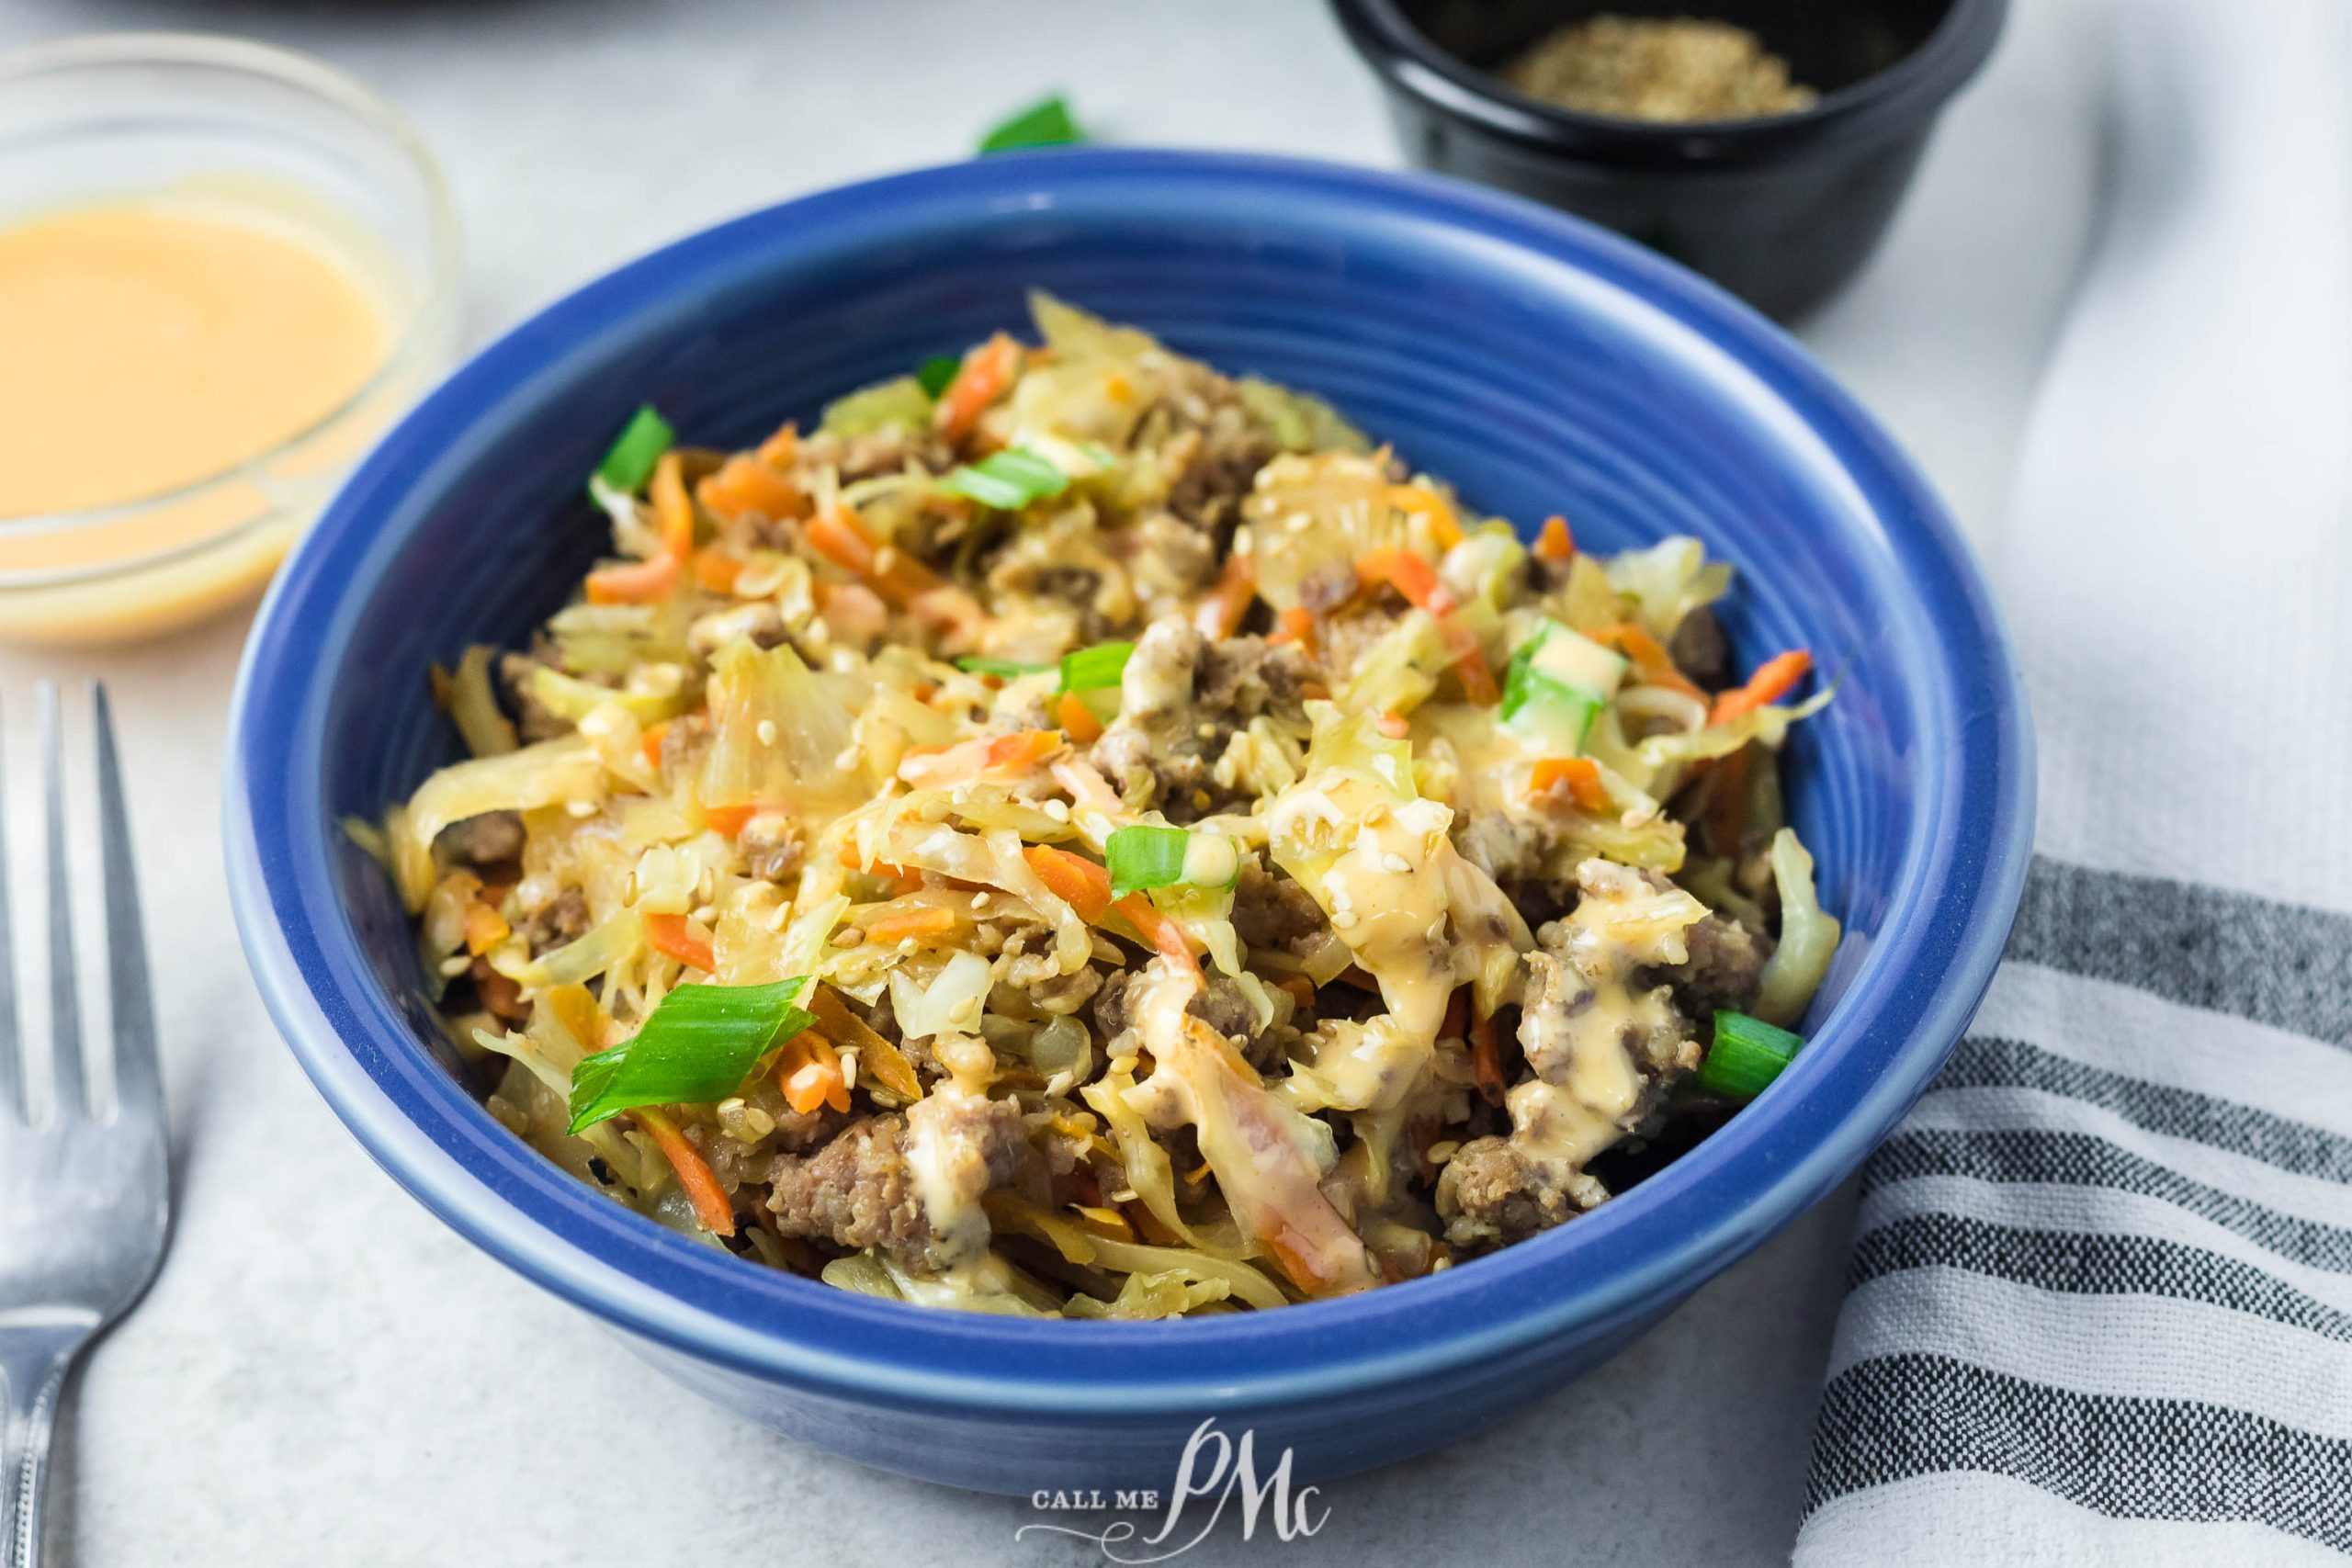 Sausage Egg Roll Skillet is the perfect meal for busy nights. Ready in 30 minutes, this recipe has all the flavor of an egg roll but it's low carb